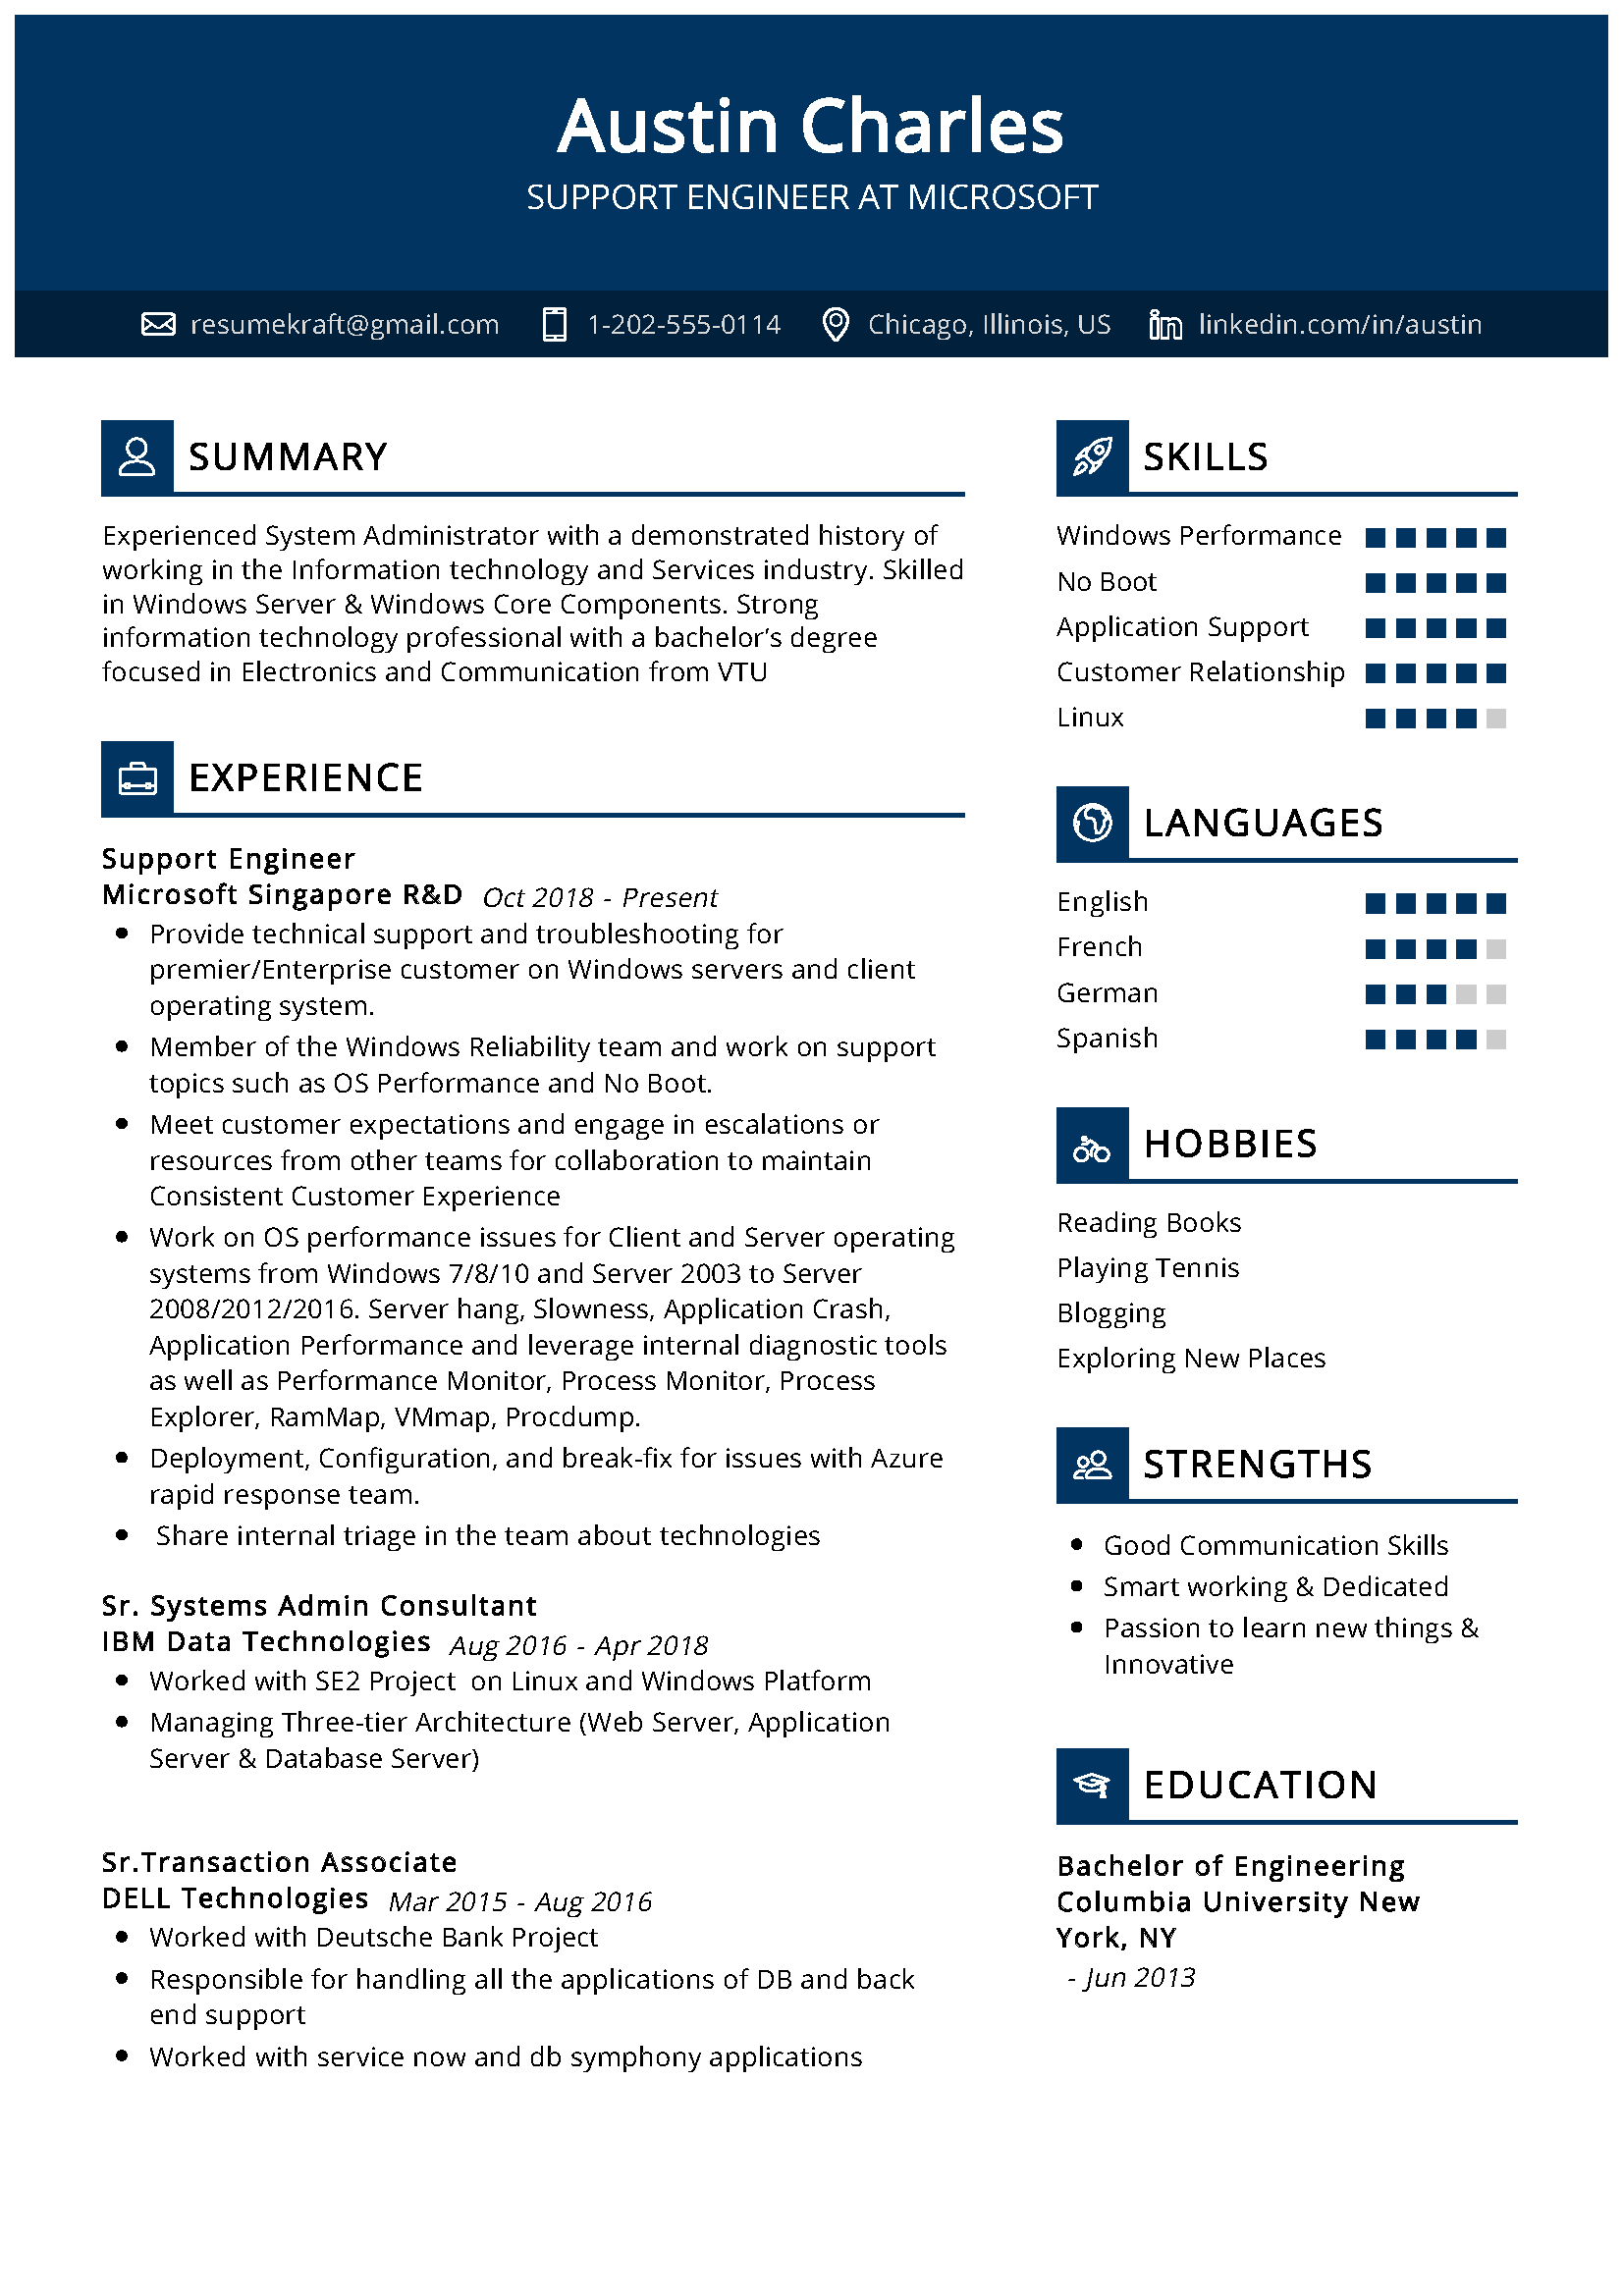 support engineer skills for resume